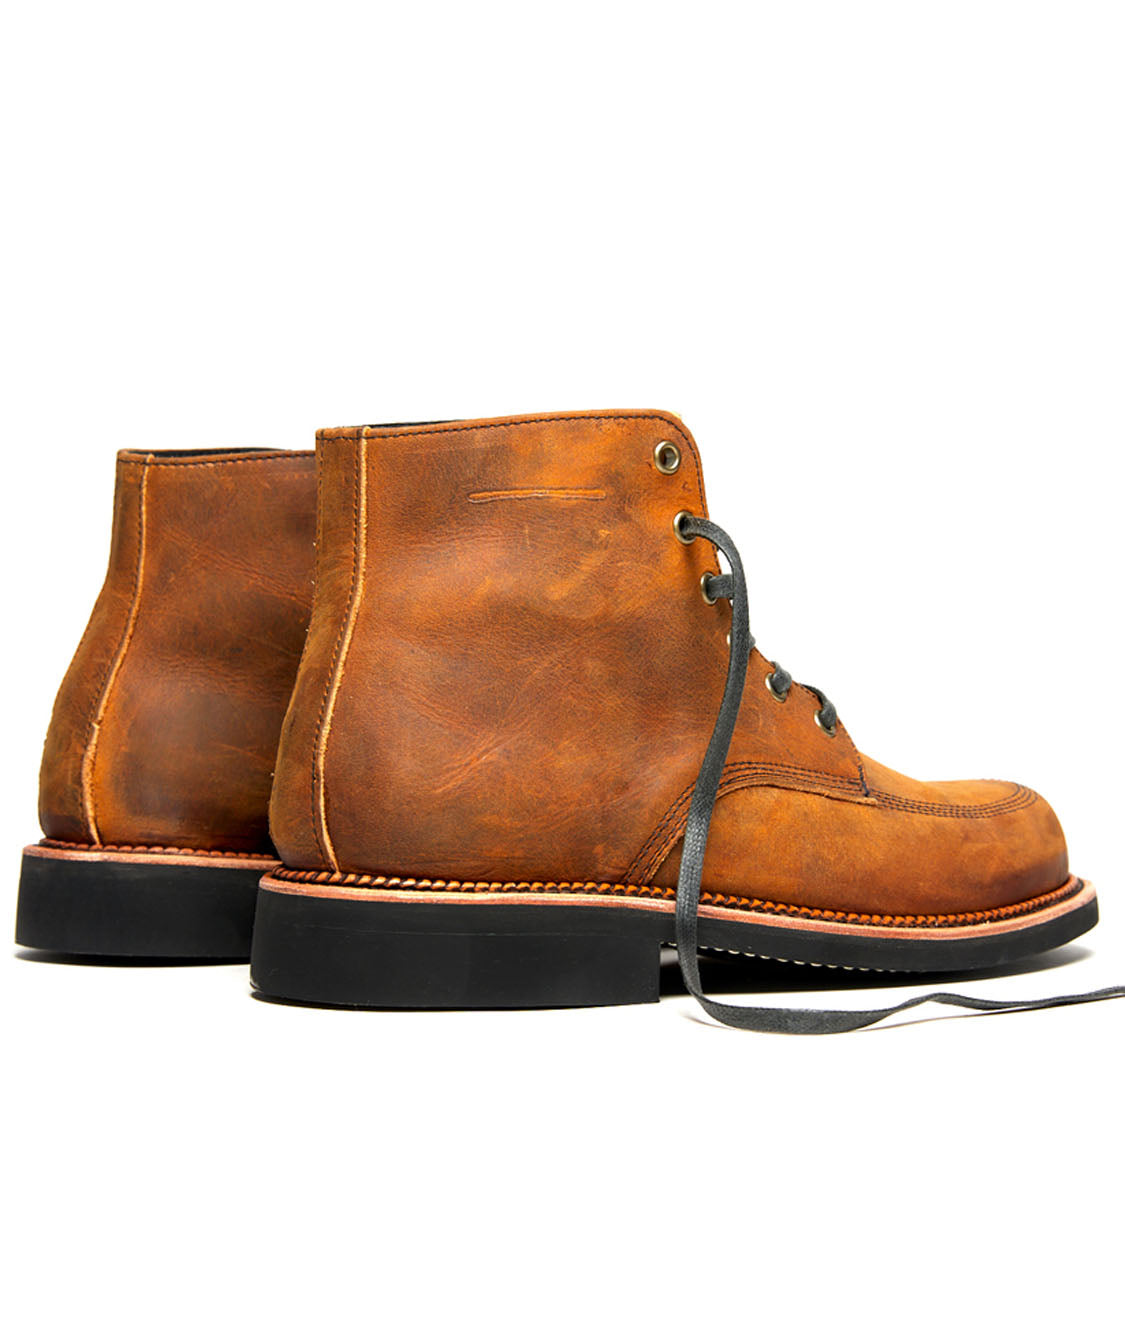 A pair of Davis brown leather boots with black laces from Broken Homme.